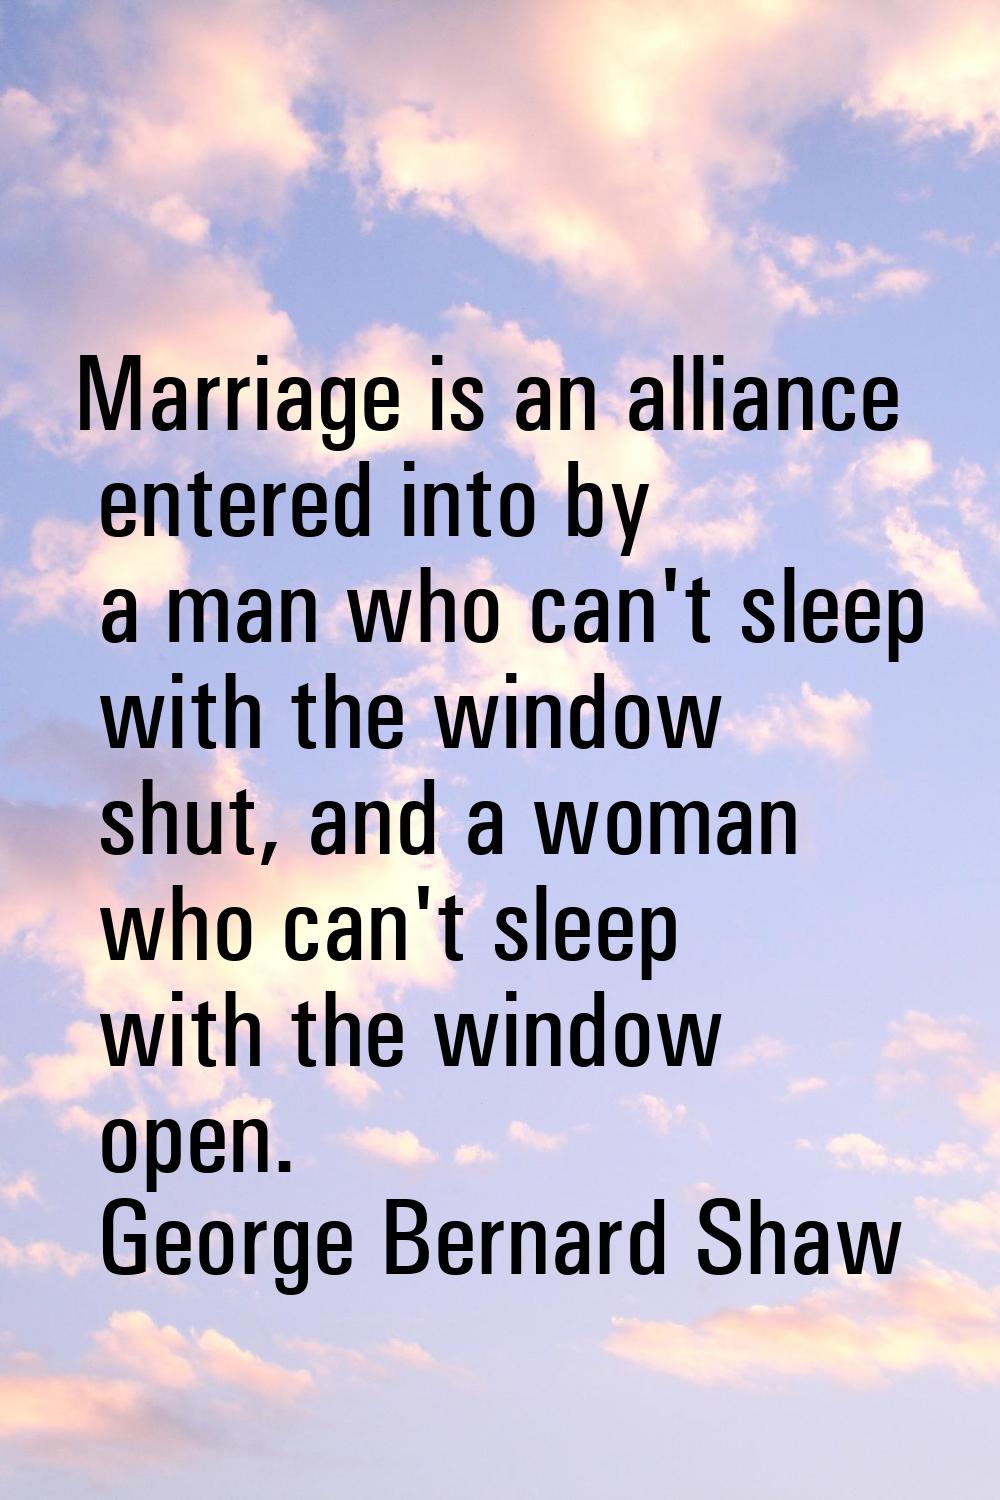 Marriage is an alliance entered into by a man who can't sleep with the window shut, and a woman who